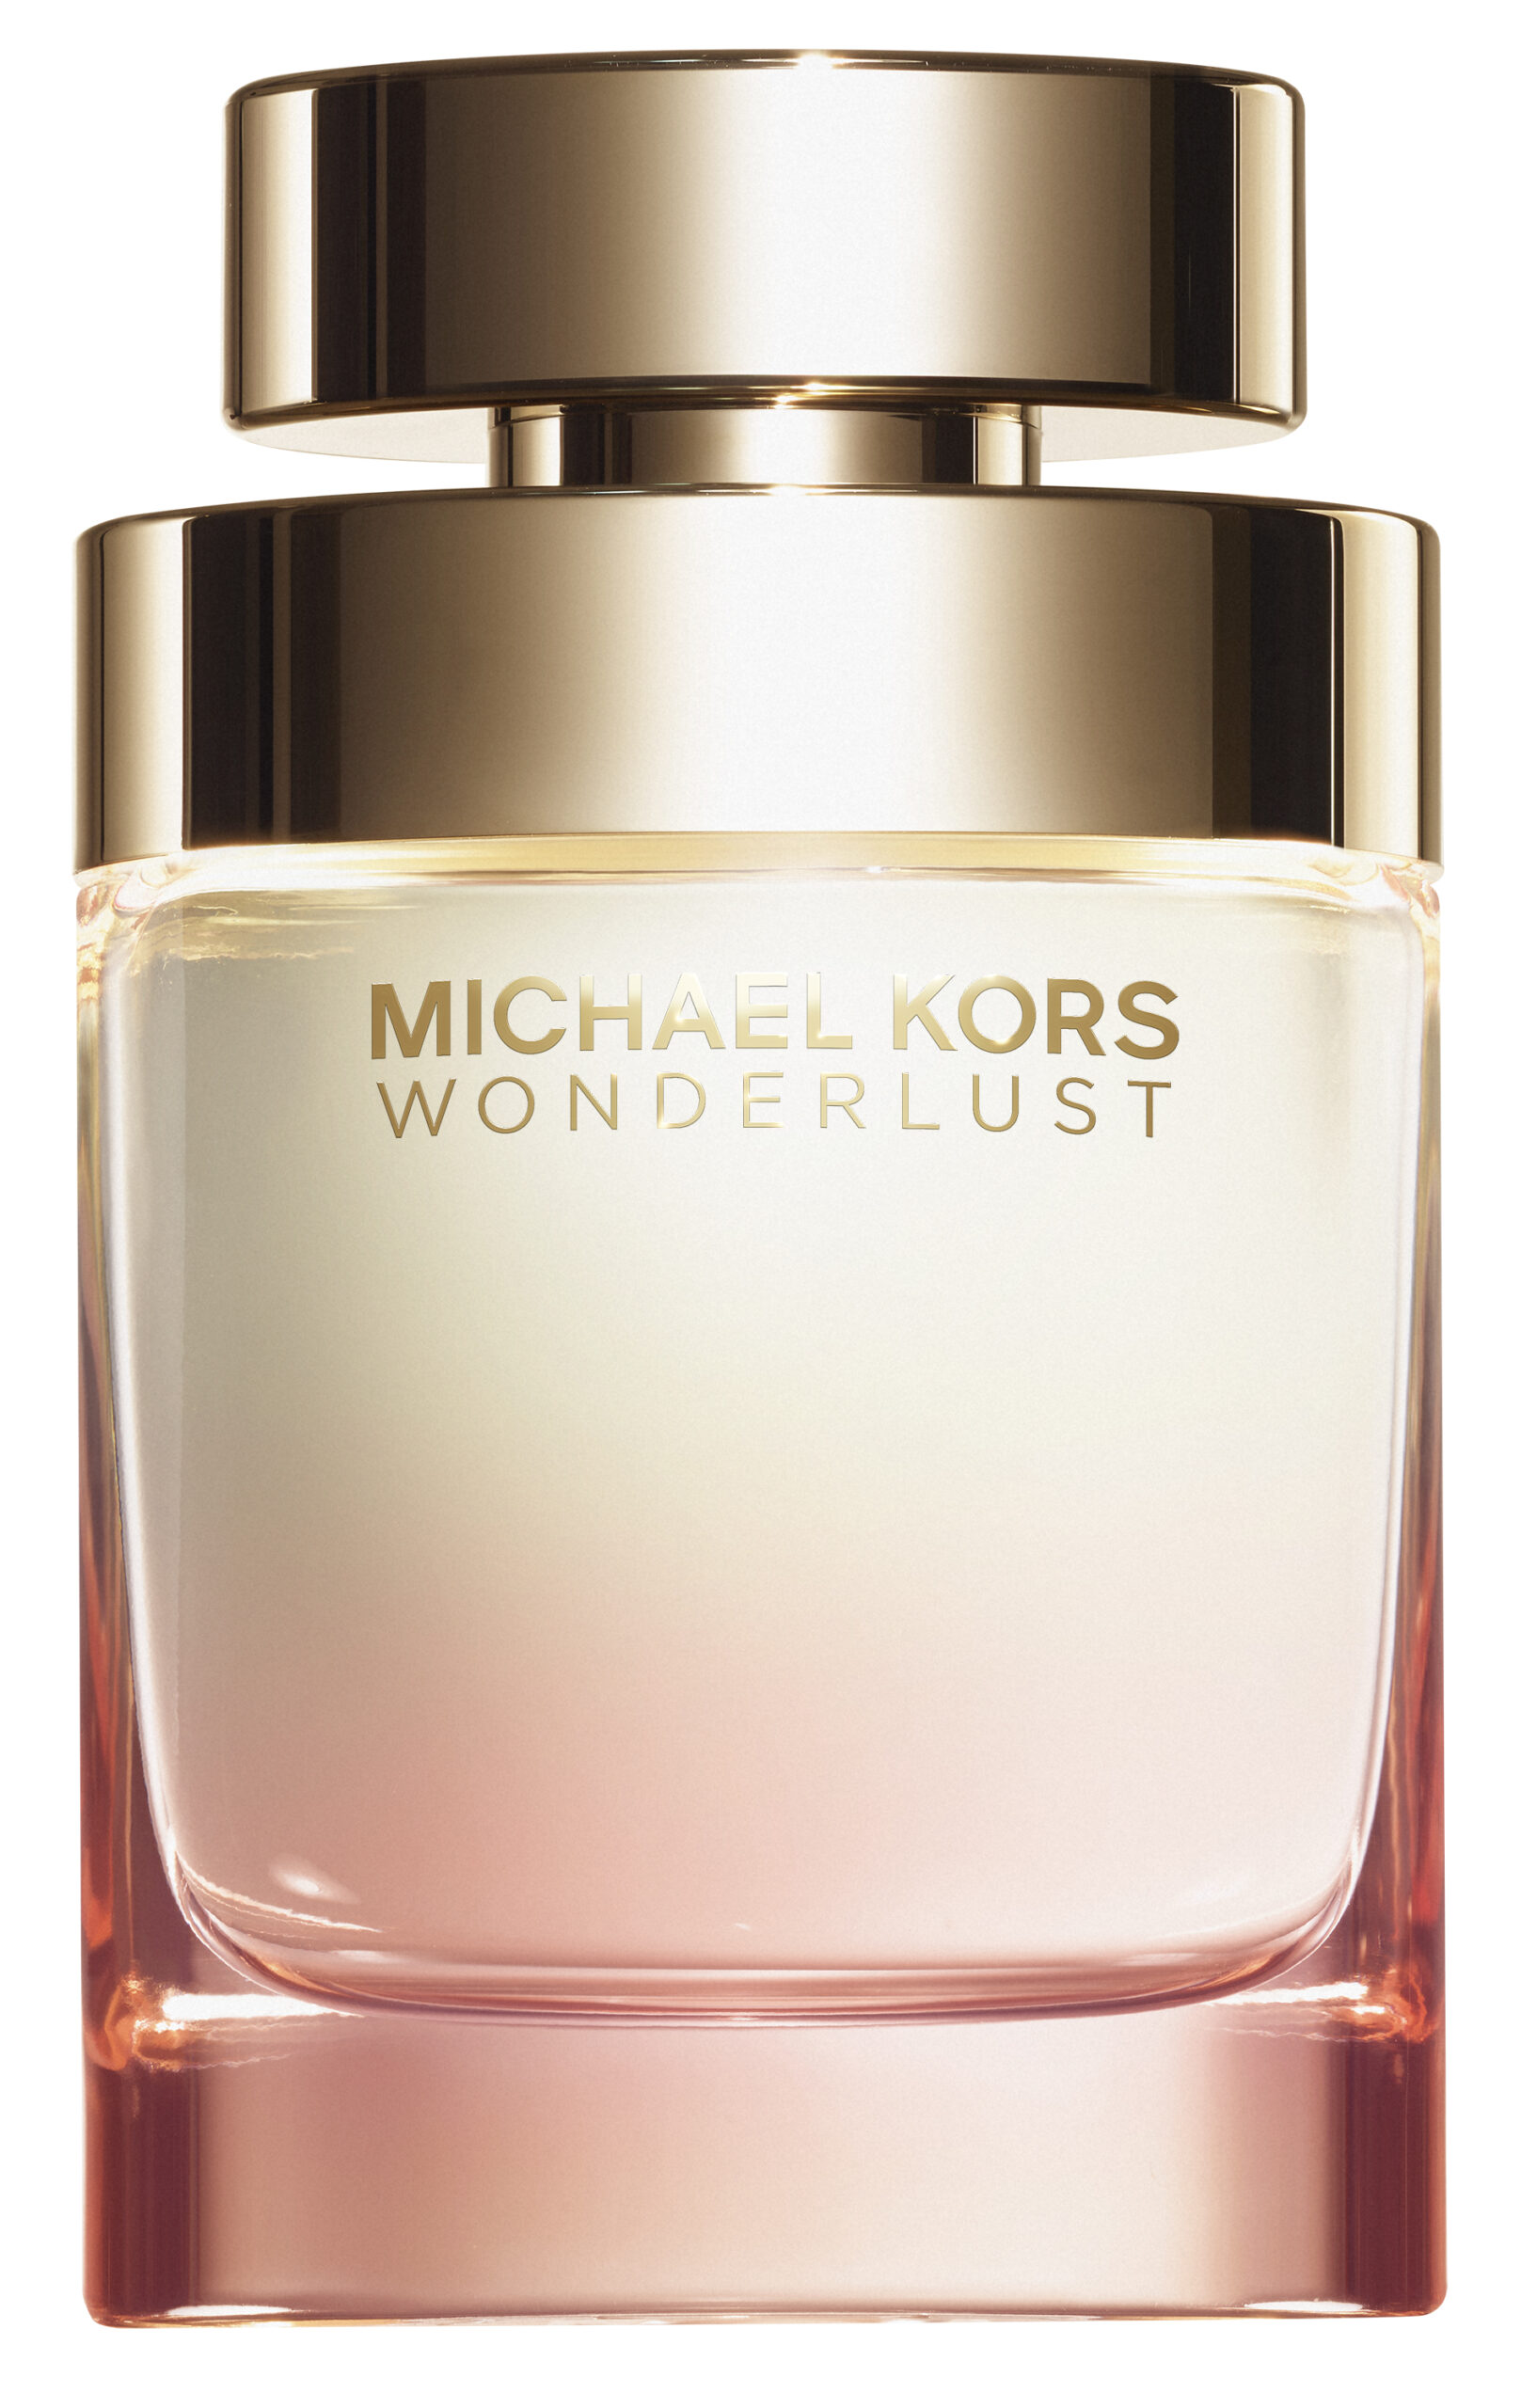 Wonderlust represents an evolution in the MIchael Kors fragrance collection 